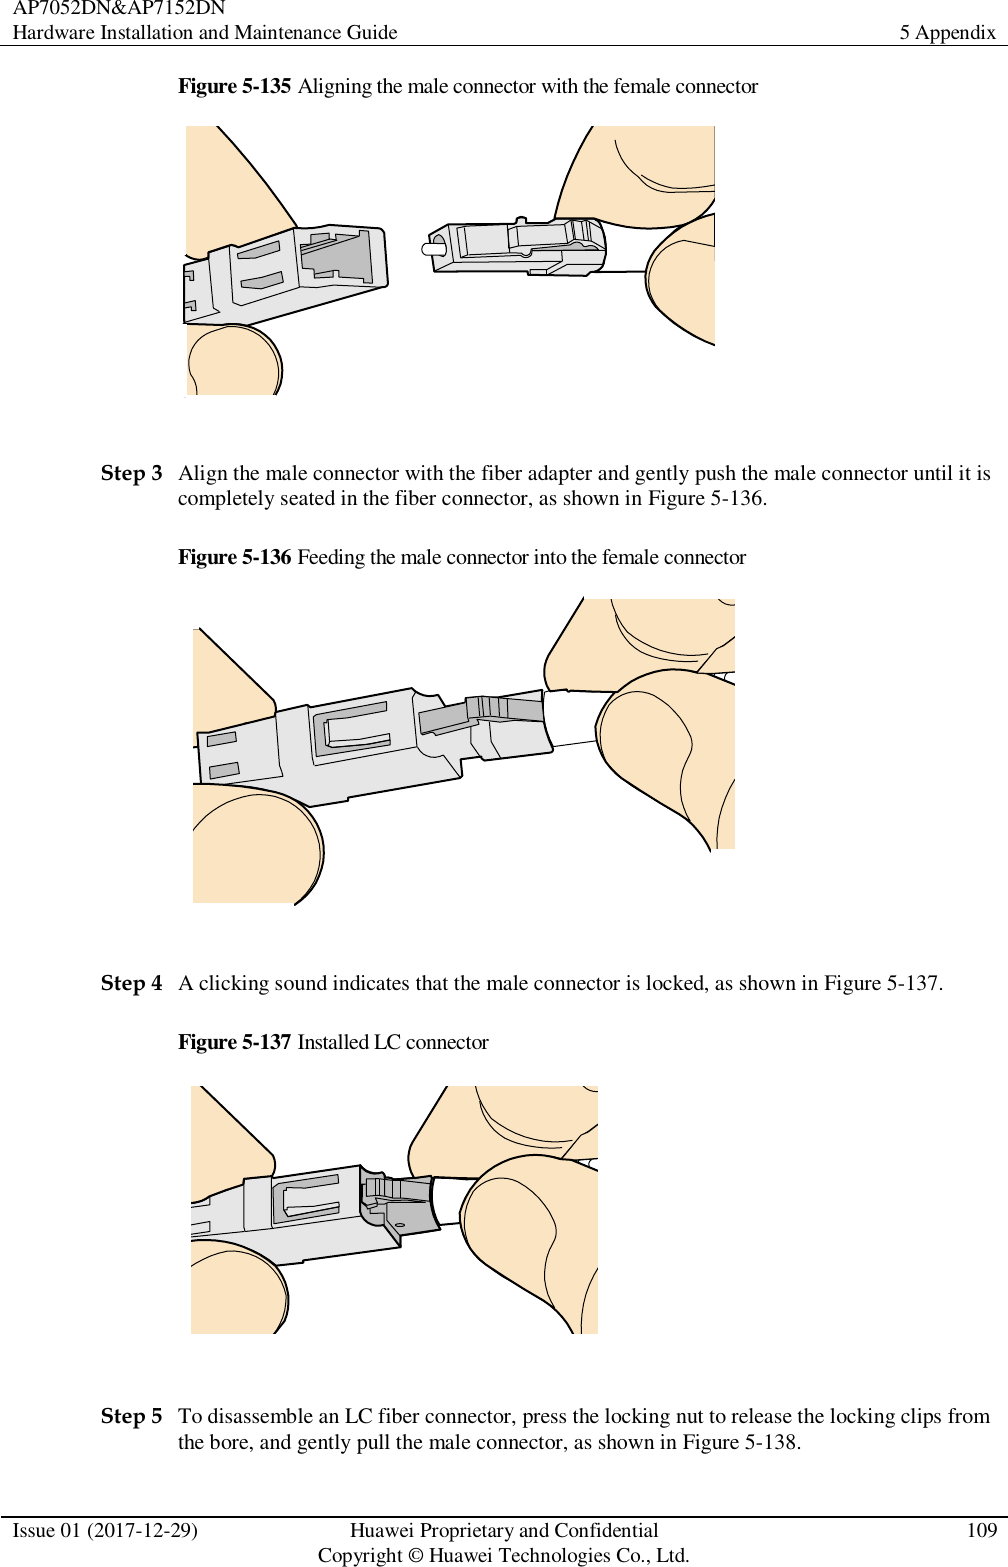 AP7052DN&amp;AP7152DN Hardware Installation and Maintenance Guide 5 Appendix  Issue 01 (2017-12-29) Huawei Proprietary and Confidential                                     Copyright © Huawei Technologies Co., Ltd. 109  Figure 5-135 Aligning the male connector with the female connector   Step 3 Align the male connector with the fiber adapter and gently push the male connector until it is completely seated in the fiber connector, as shown in Figure 5-136. Figure 5-136 Feeding the male connector into the female connector   Step 4 A clicking sound indicates that the male connector is locked, as shown in Figure 5-137. Figure 5-137 Installed LC connector   Step 5 To disassemble an LC fiber connector, press the locking nut to release the locking clips from the bore, and gently pull the male connector, as shown in Figure 5-138. 